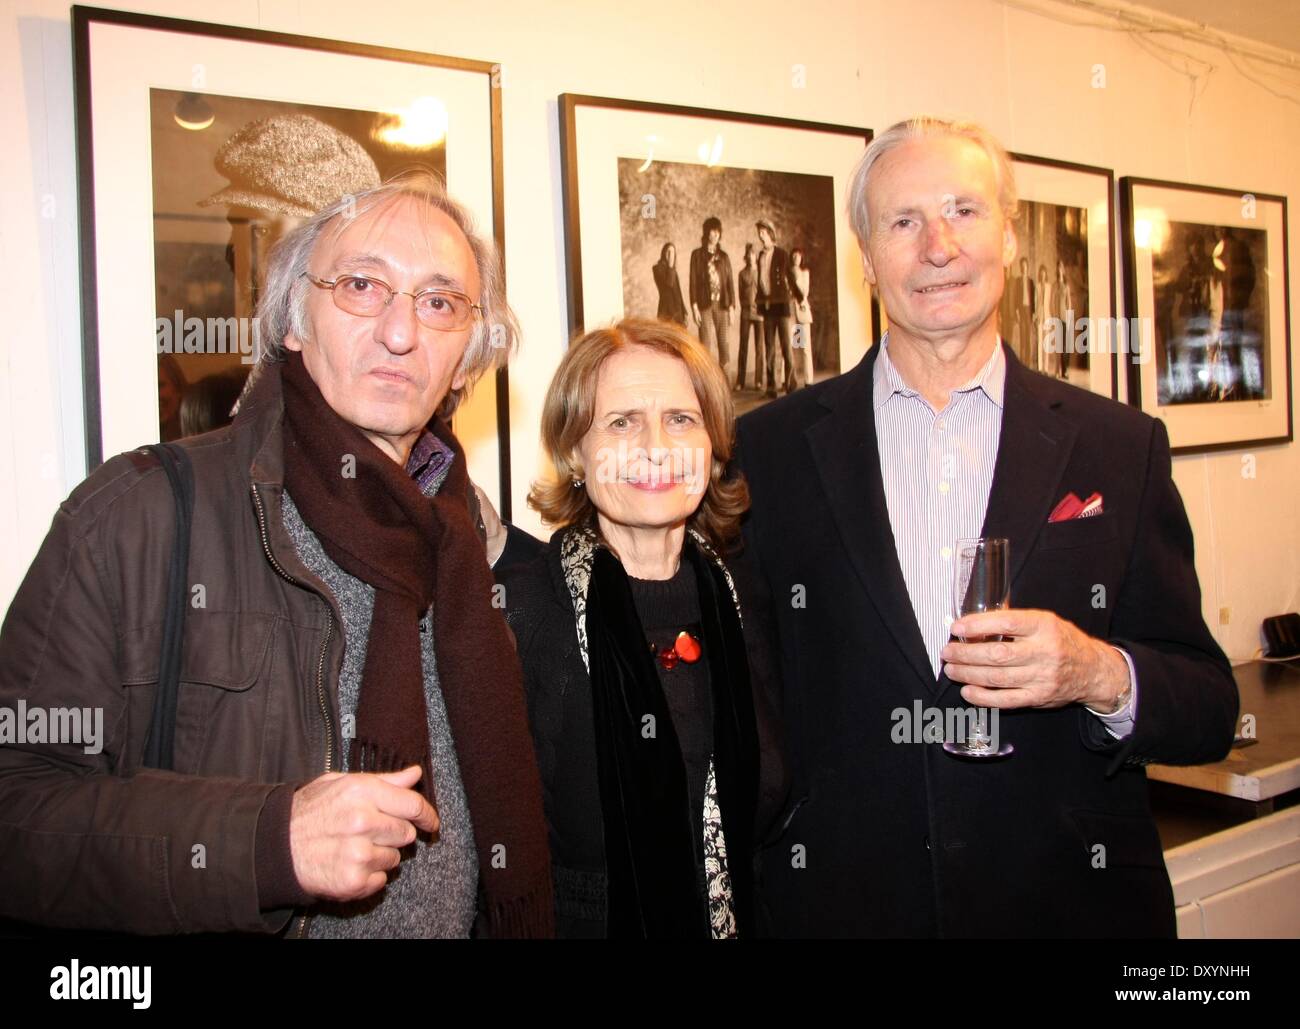 Brown Sugar on Main Street: Unseen Images of The Rolling Stones private viewing session at the Zebra Gallery Featuring: Dominique Tarle,Peter Webb Where: London United Kingdom When: 22 Nov 2012 Stock Photo